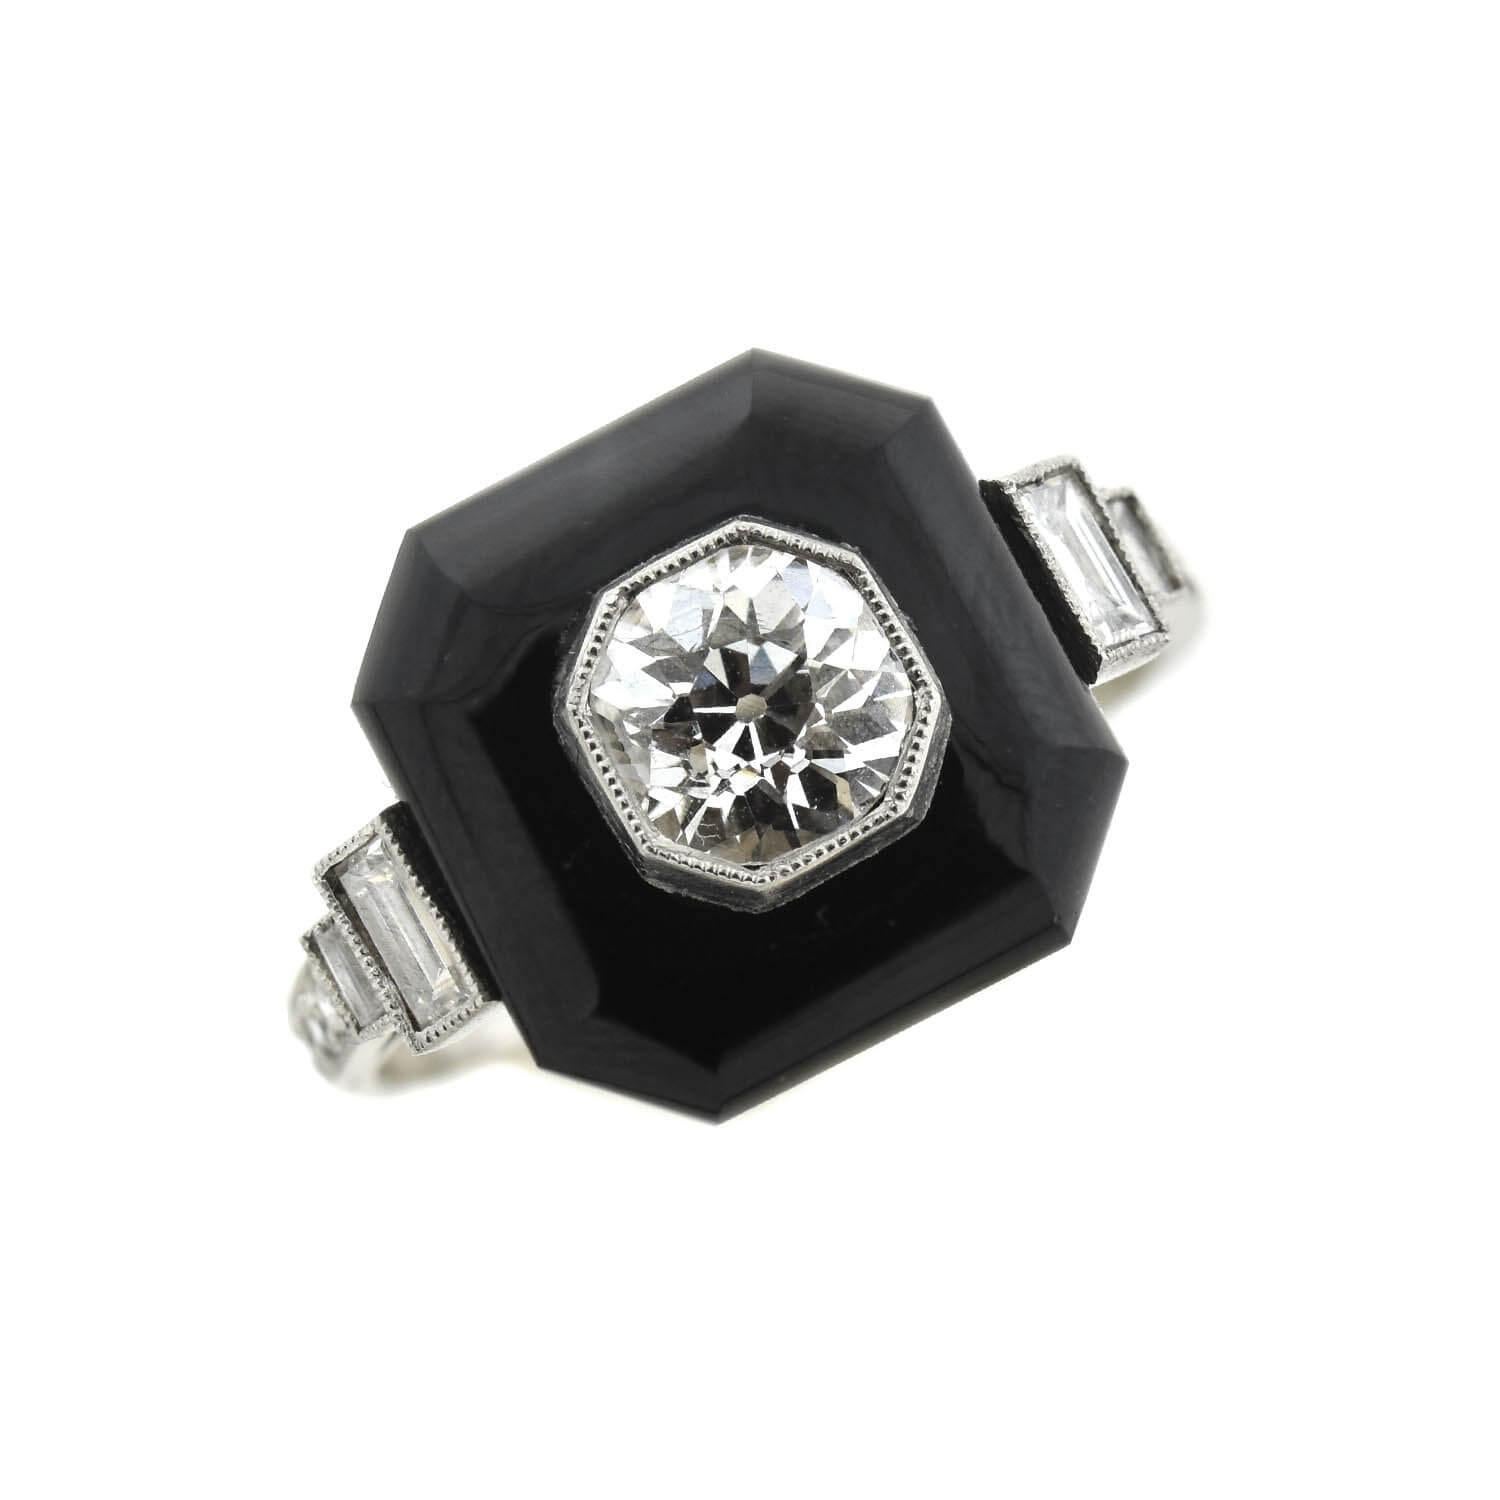 onyx ring with diamond in center